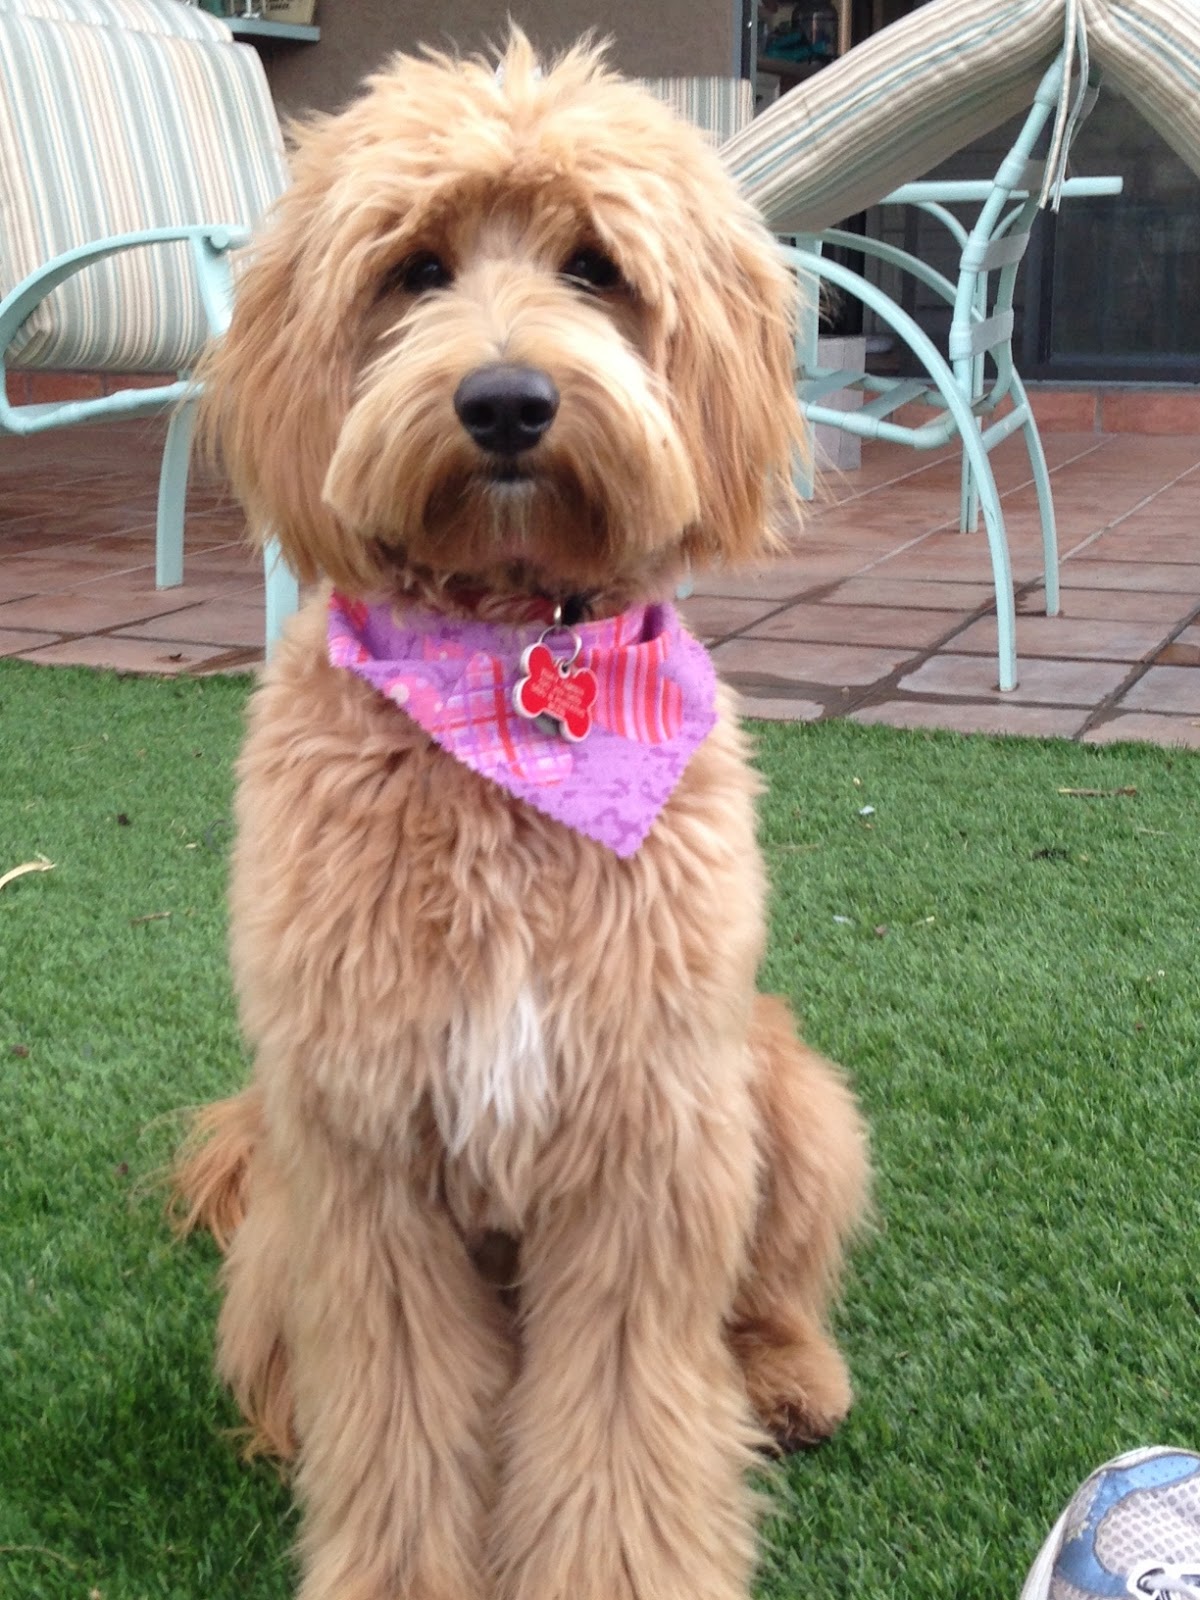 GROOMING NEEDS OF THE AUSTRALIAN LABRADOODLE